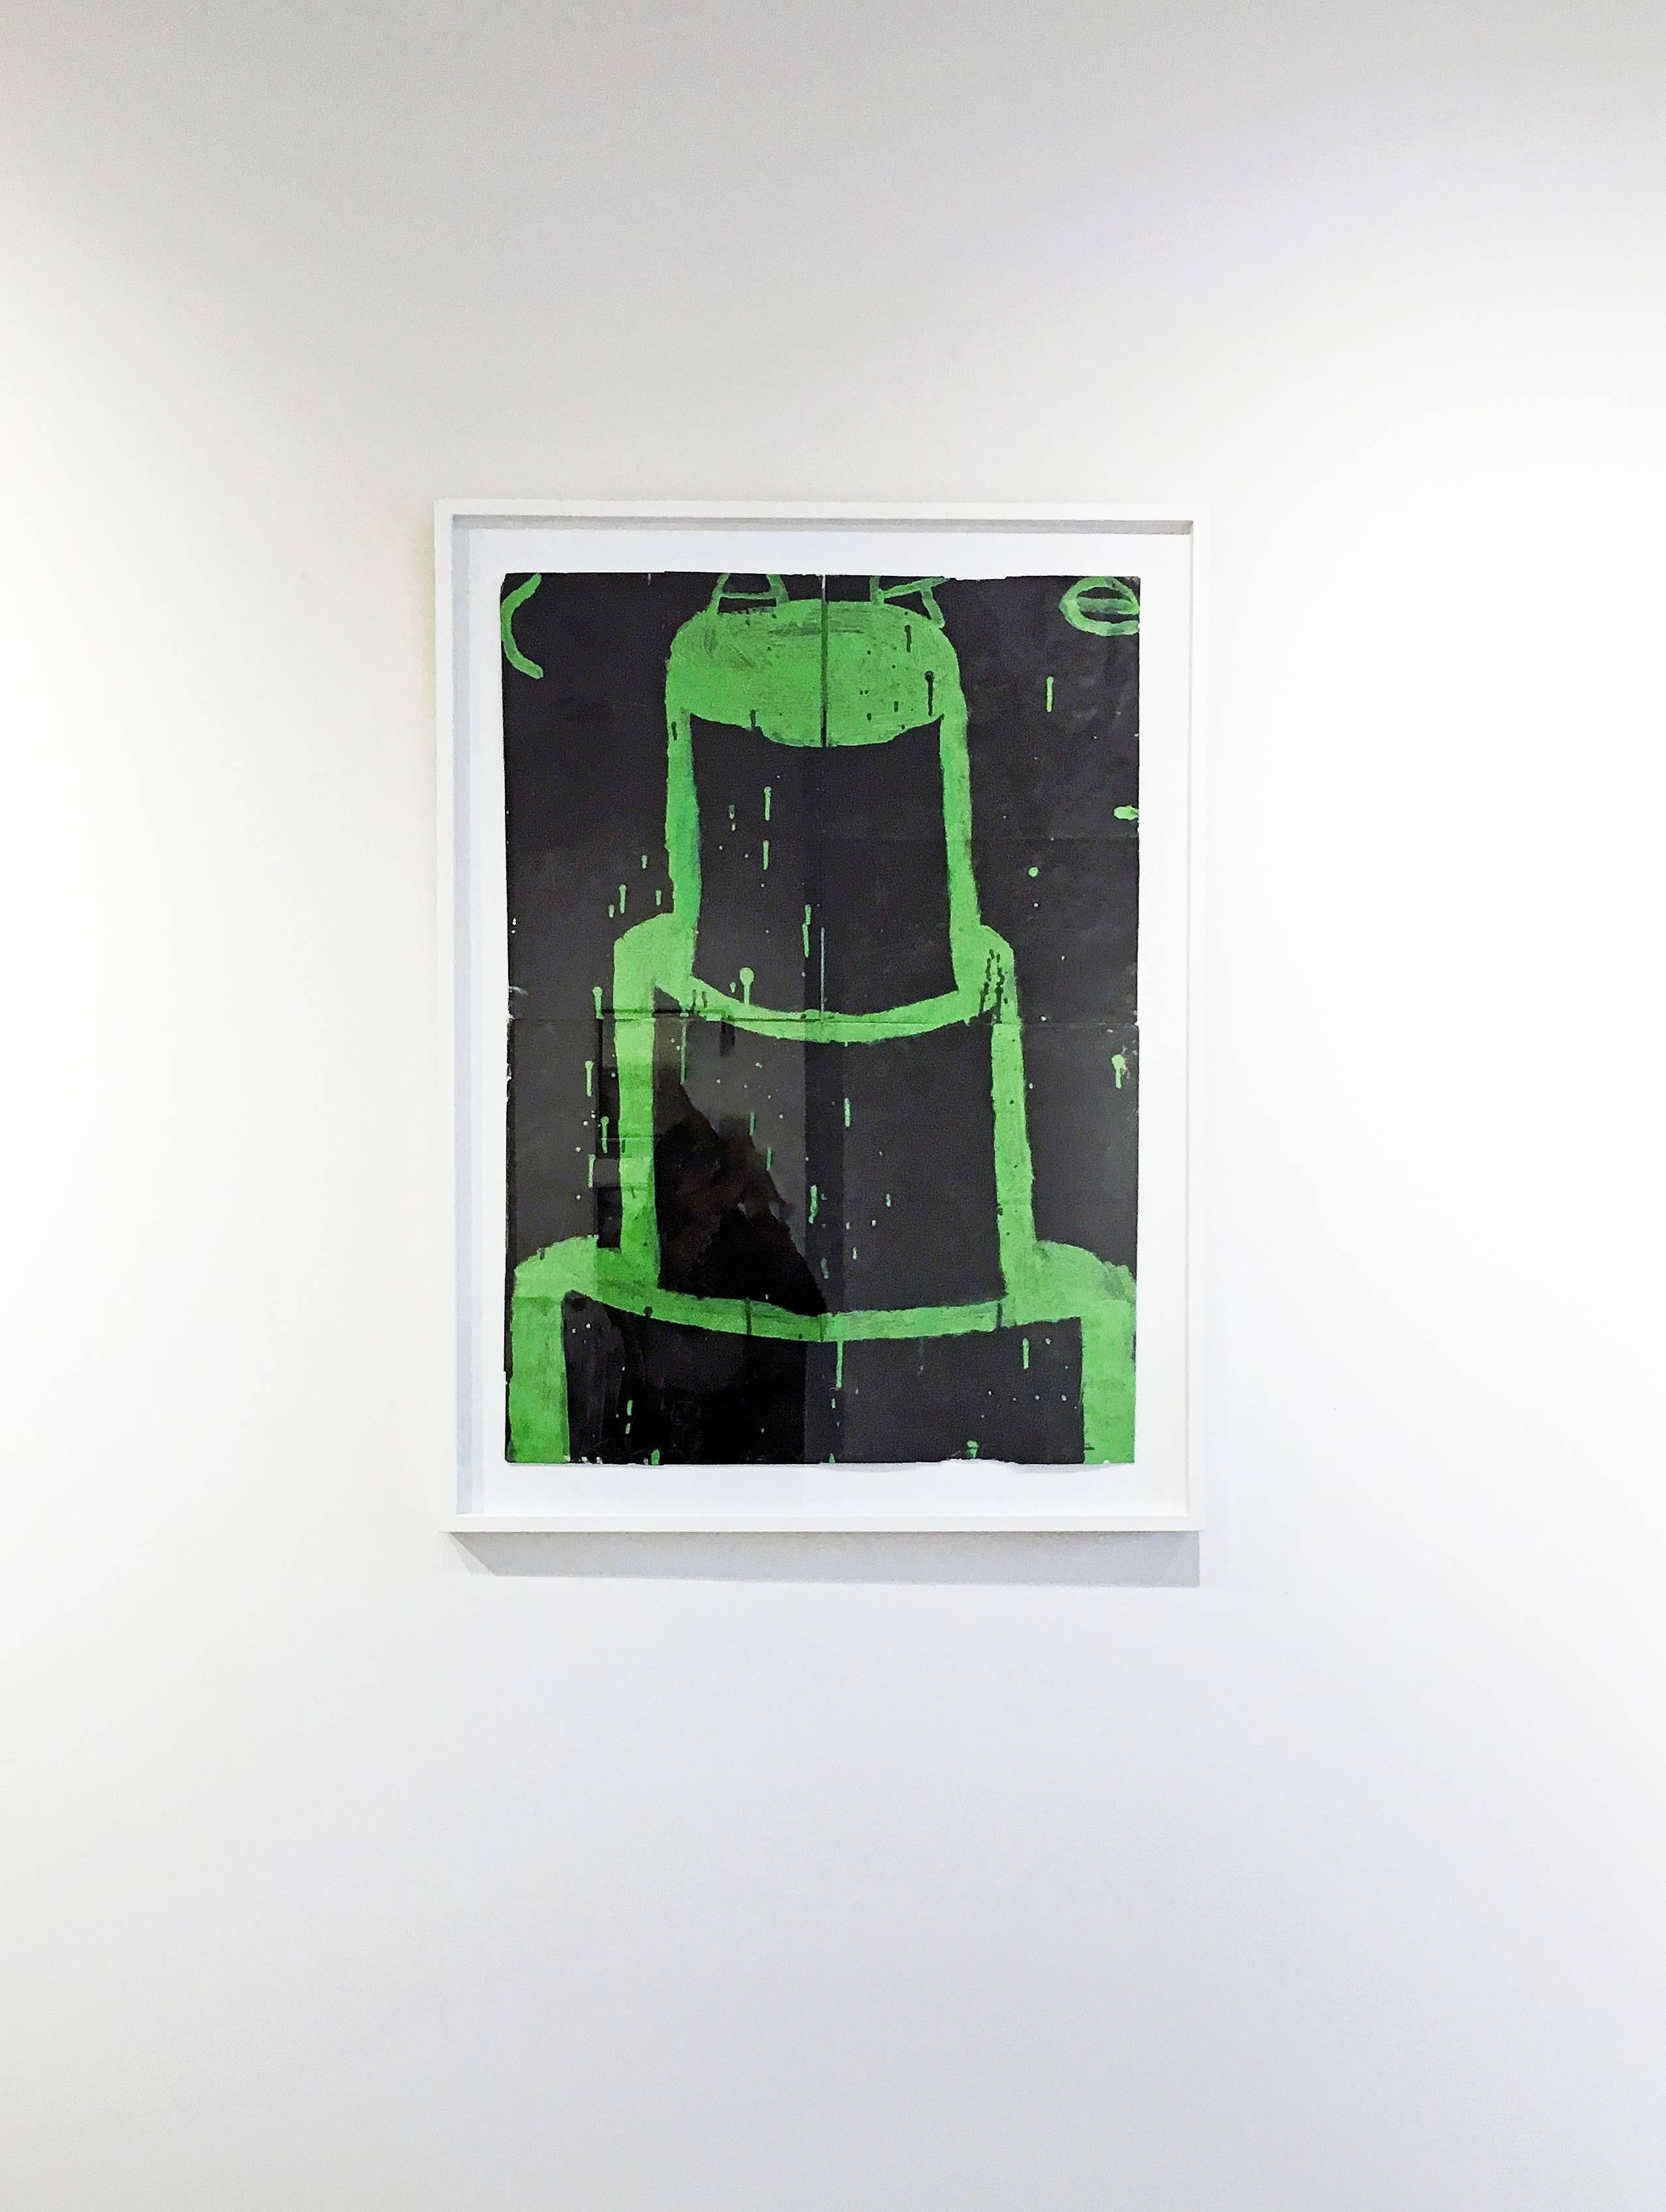 Cake (Green on Black) by contemporary artist, Gary Komarin, 2015. Acrylic on paper bags, 33 x 23.25 inches. The faux naive style painting of a 3 tier cake is outlined in neon green on a black background. Framed in white wood.

Born in 1951 in New